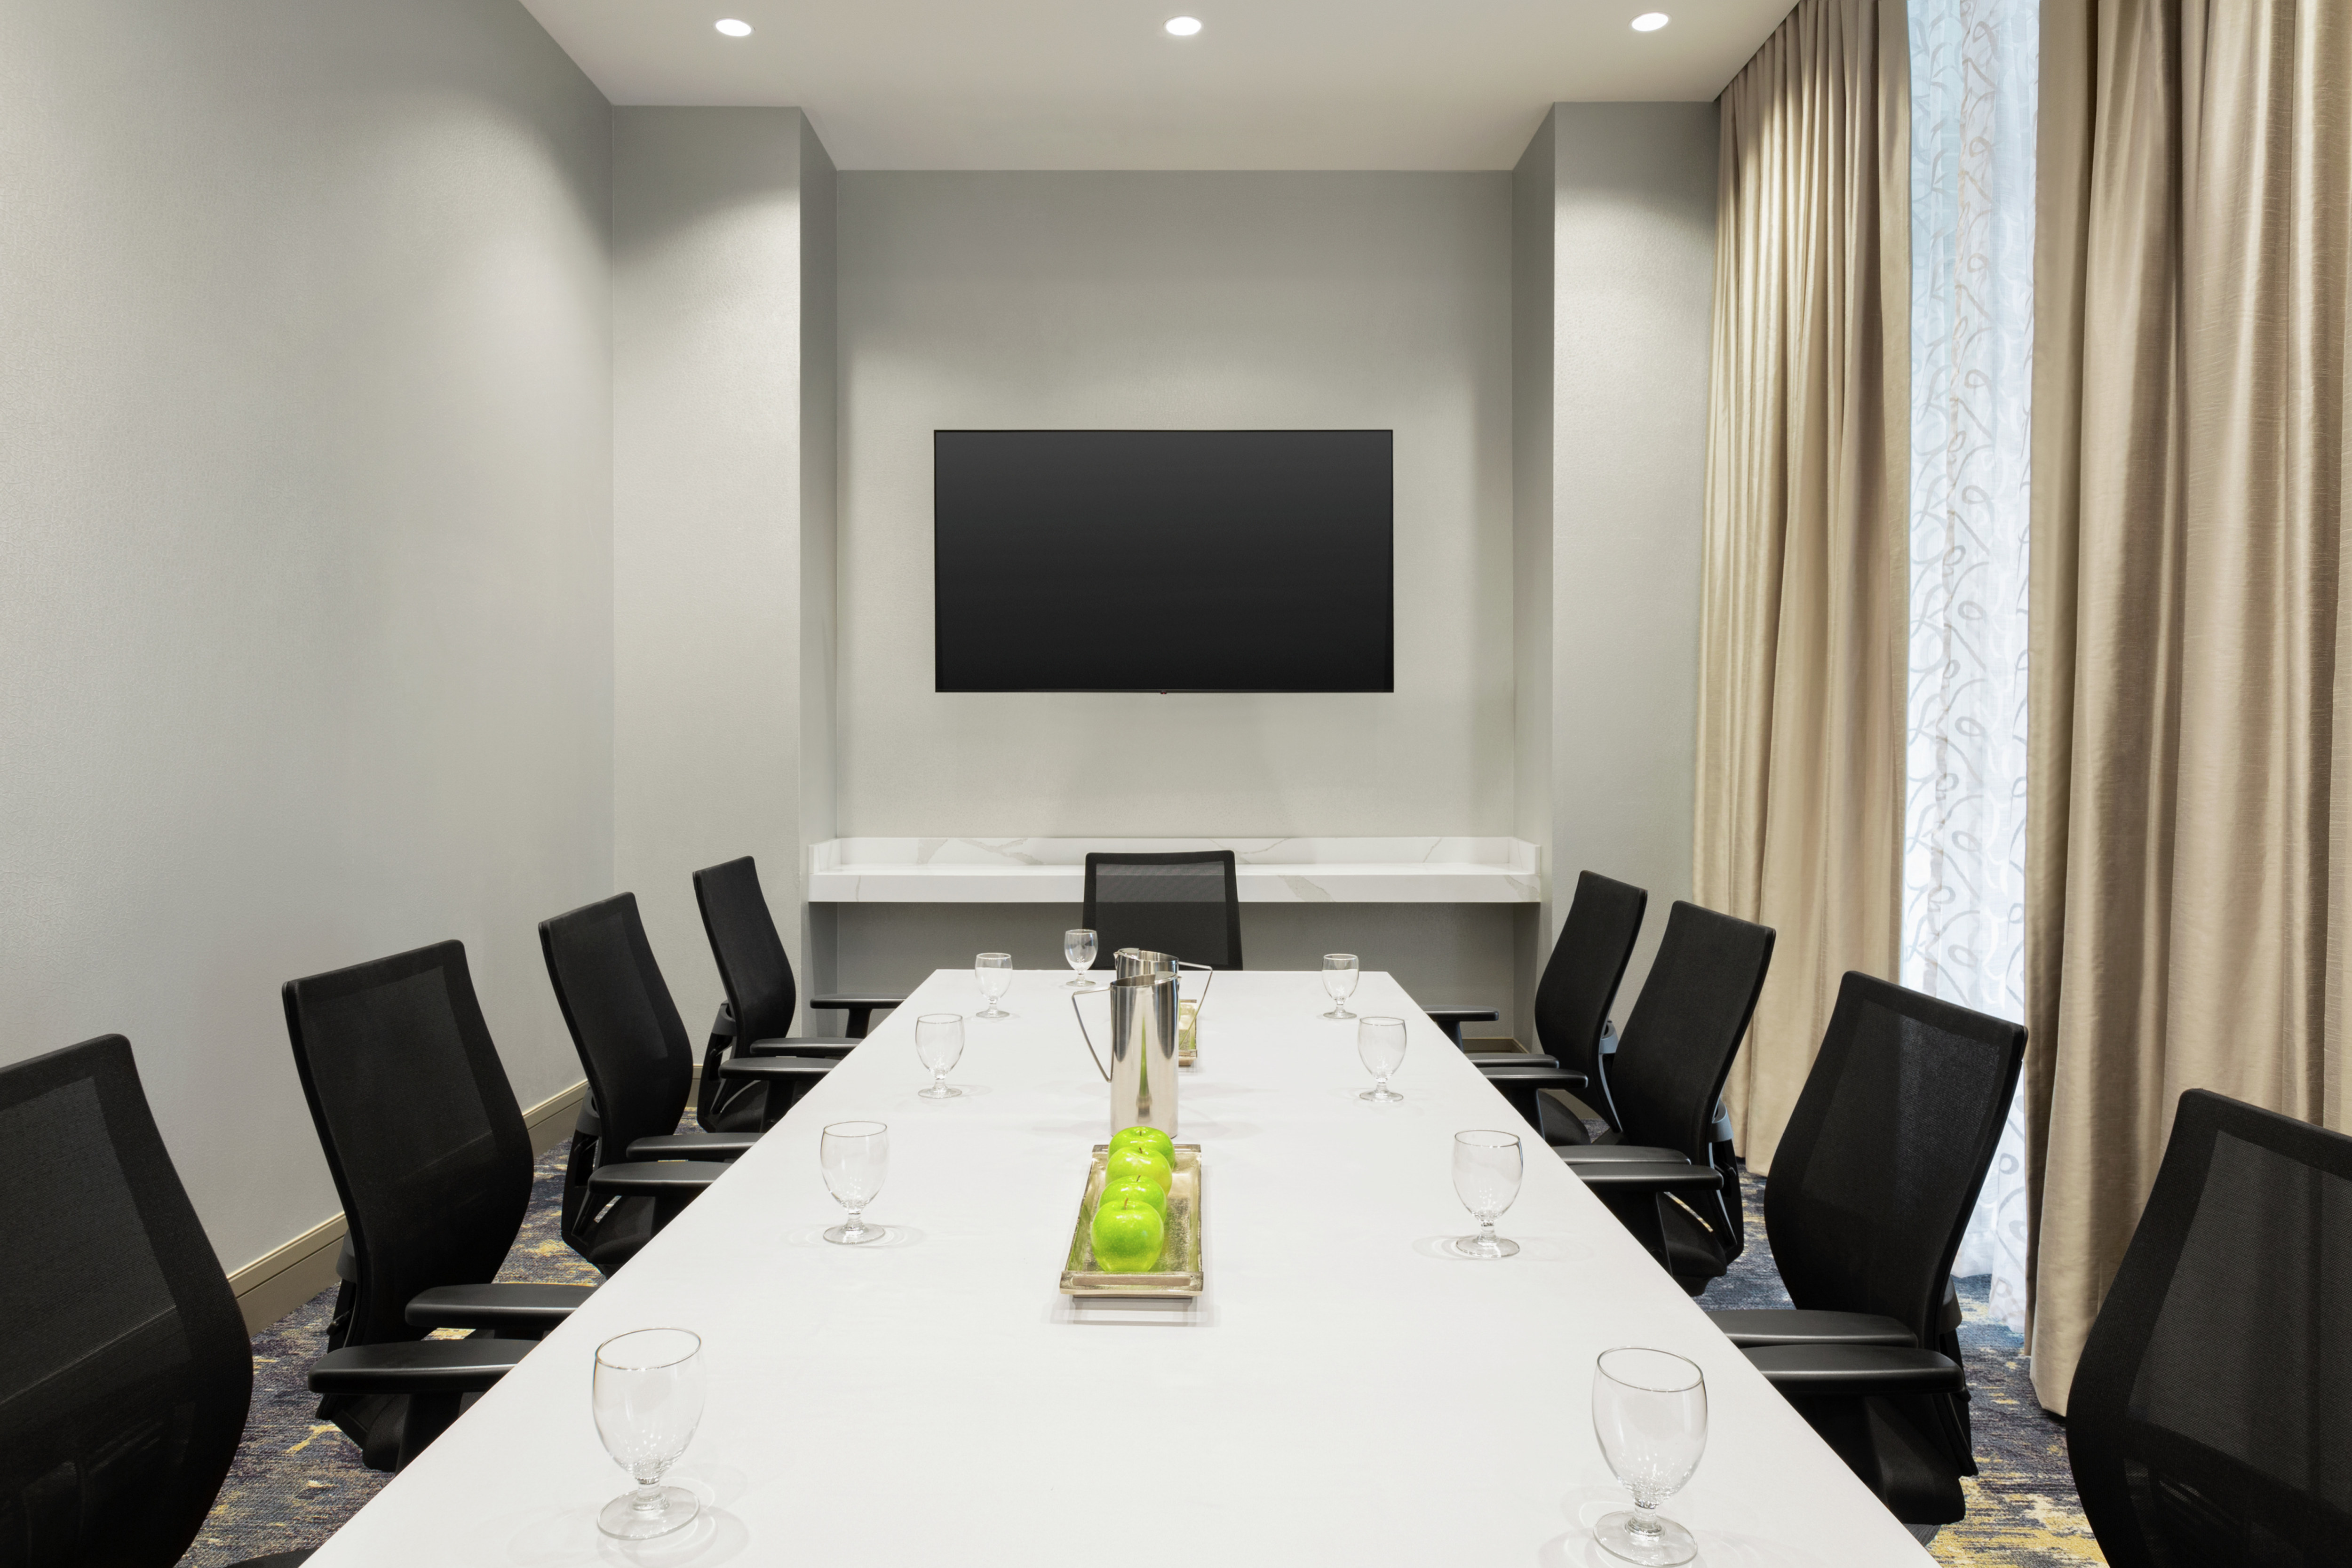 Bright on-site meeting room featuring large boardroom table and TV at front of room.